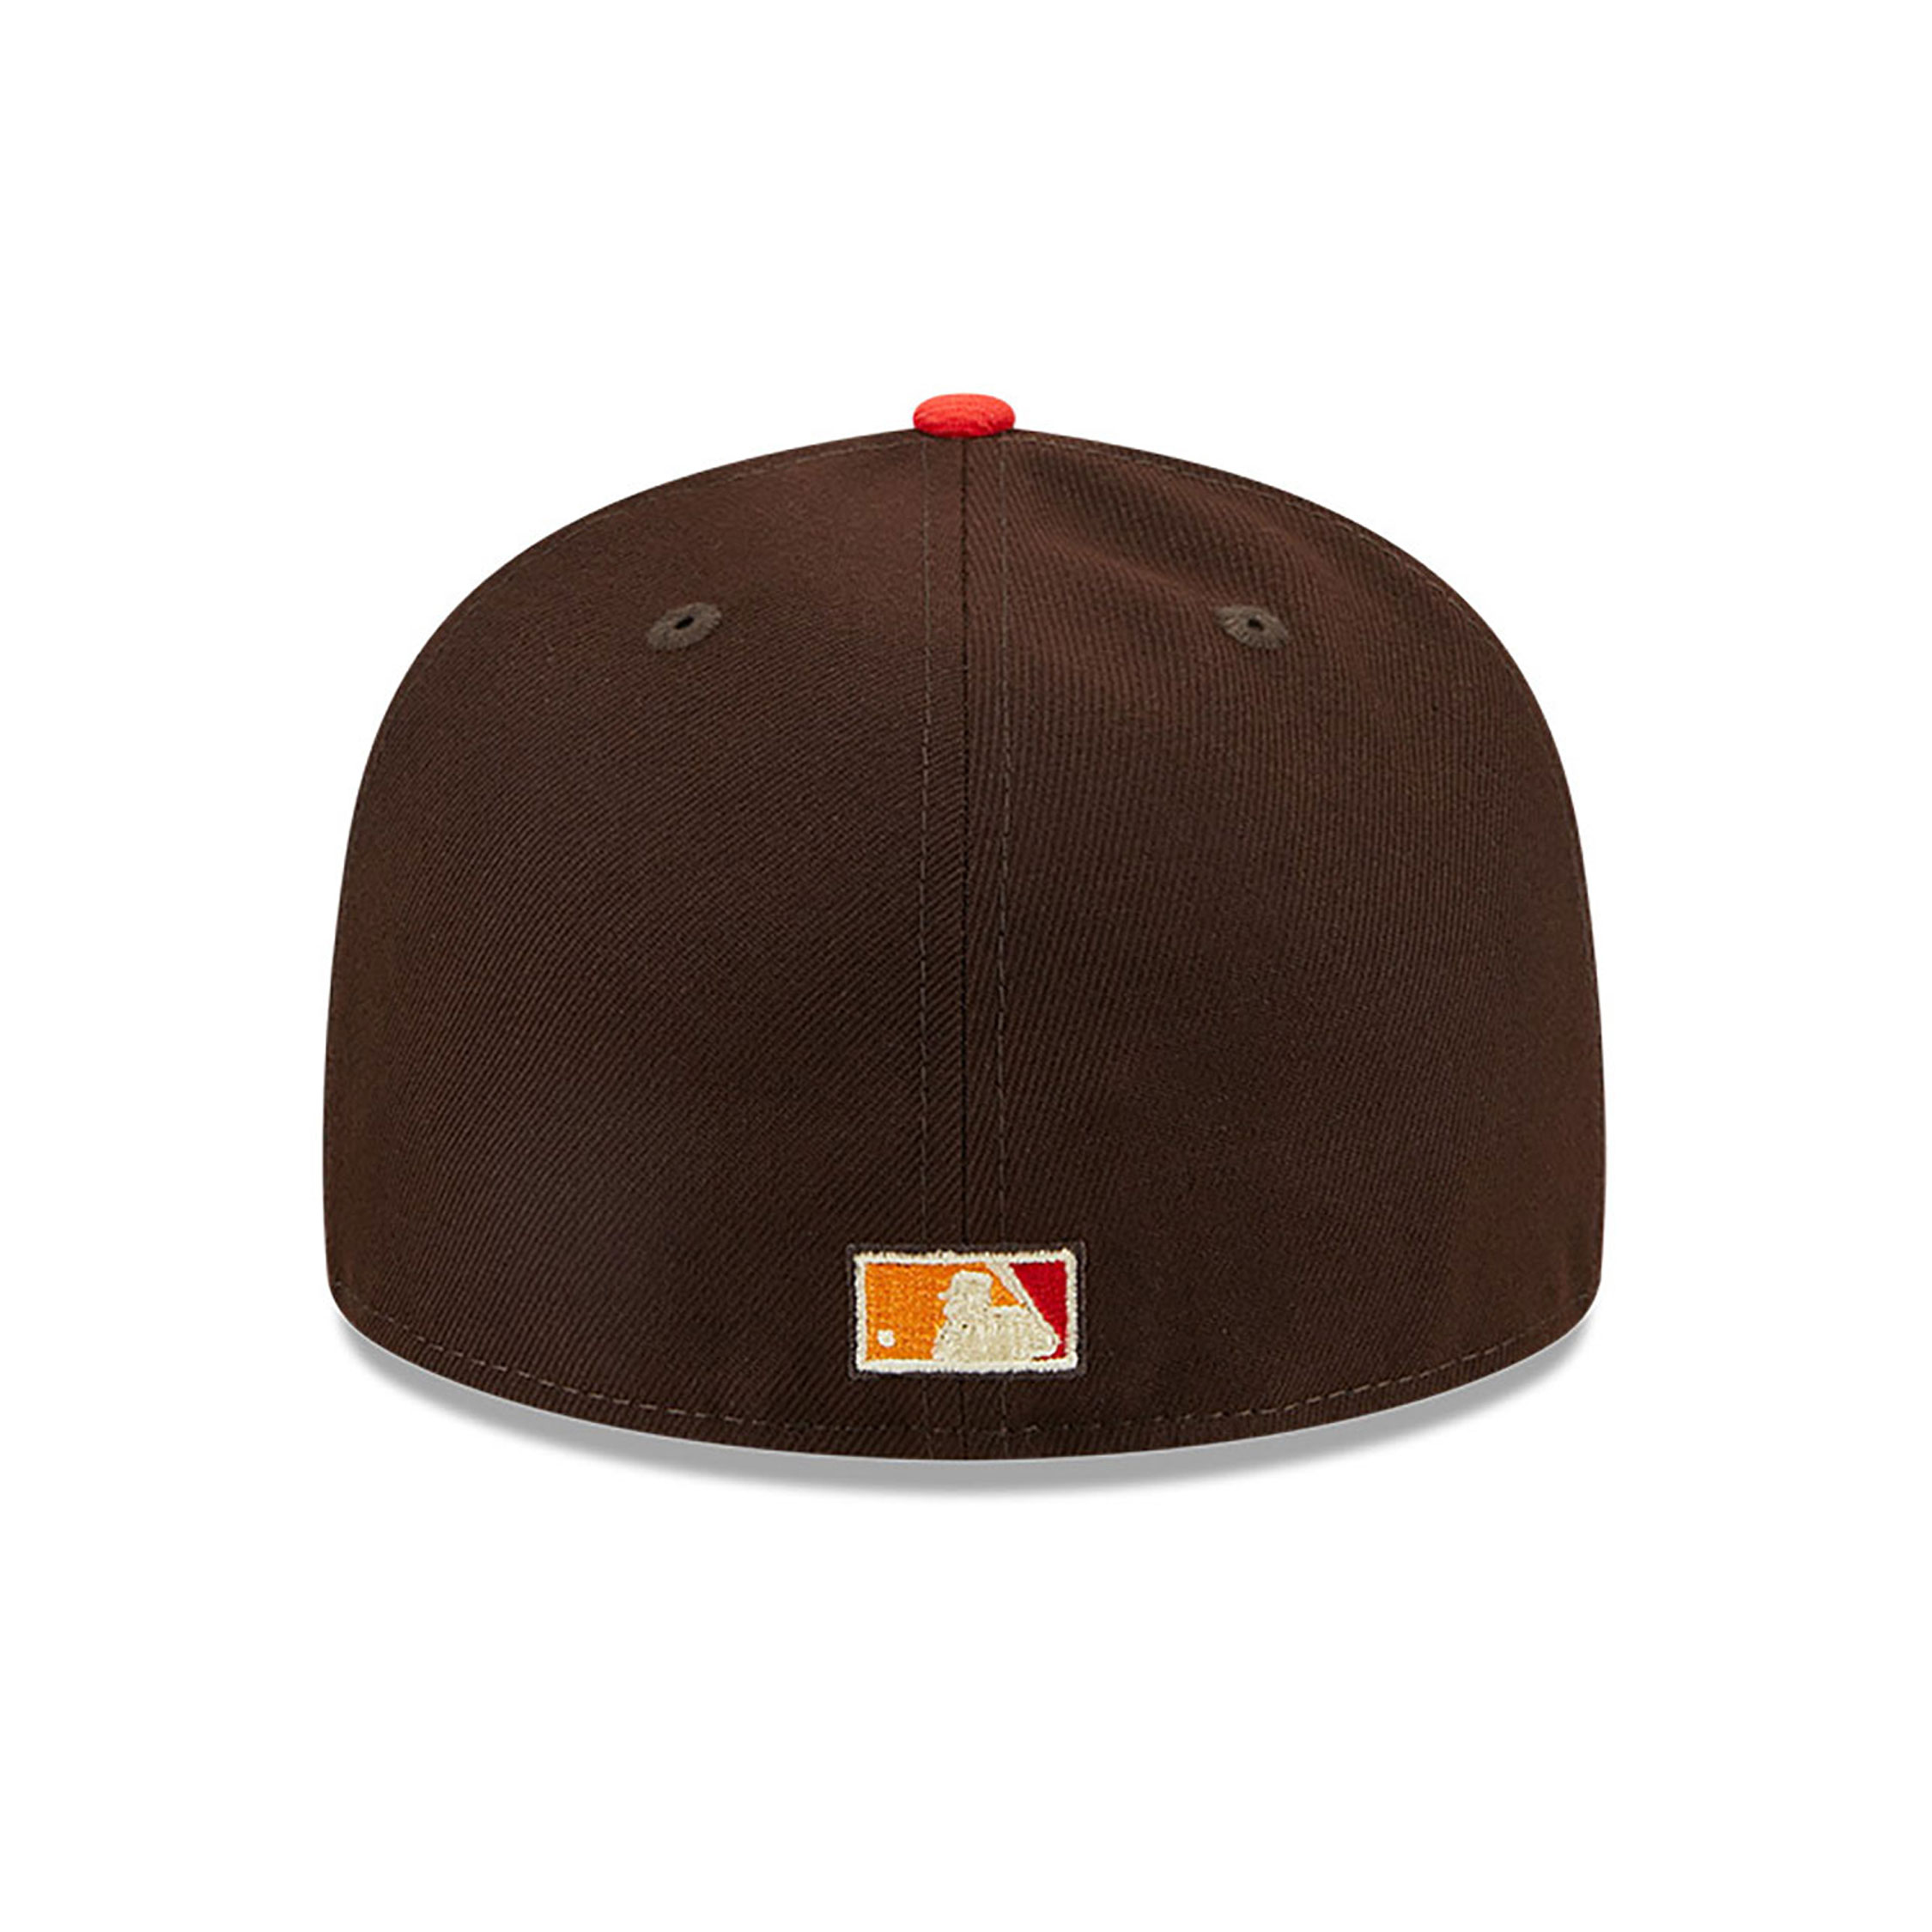 Oakland Athletics The Elements Dark Brown 59FIFTY Fitted Cap